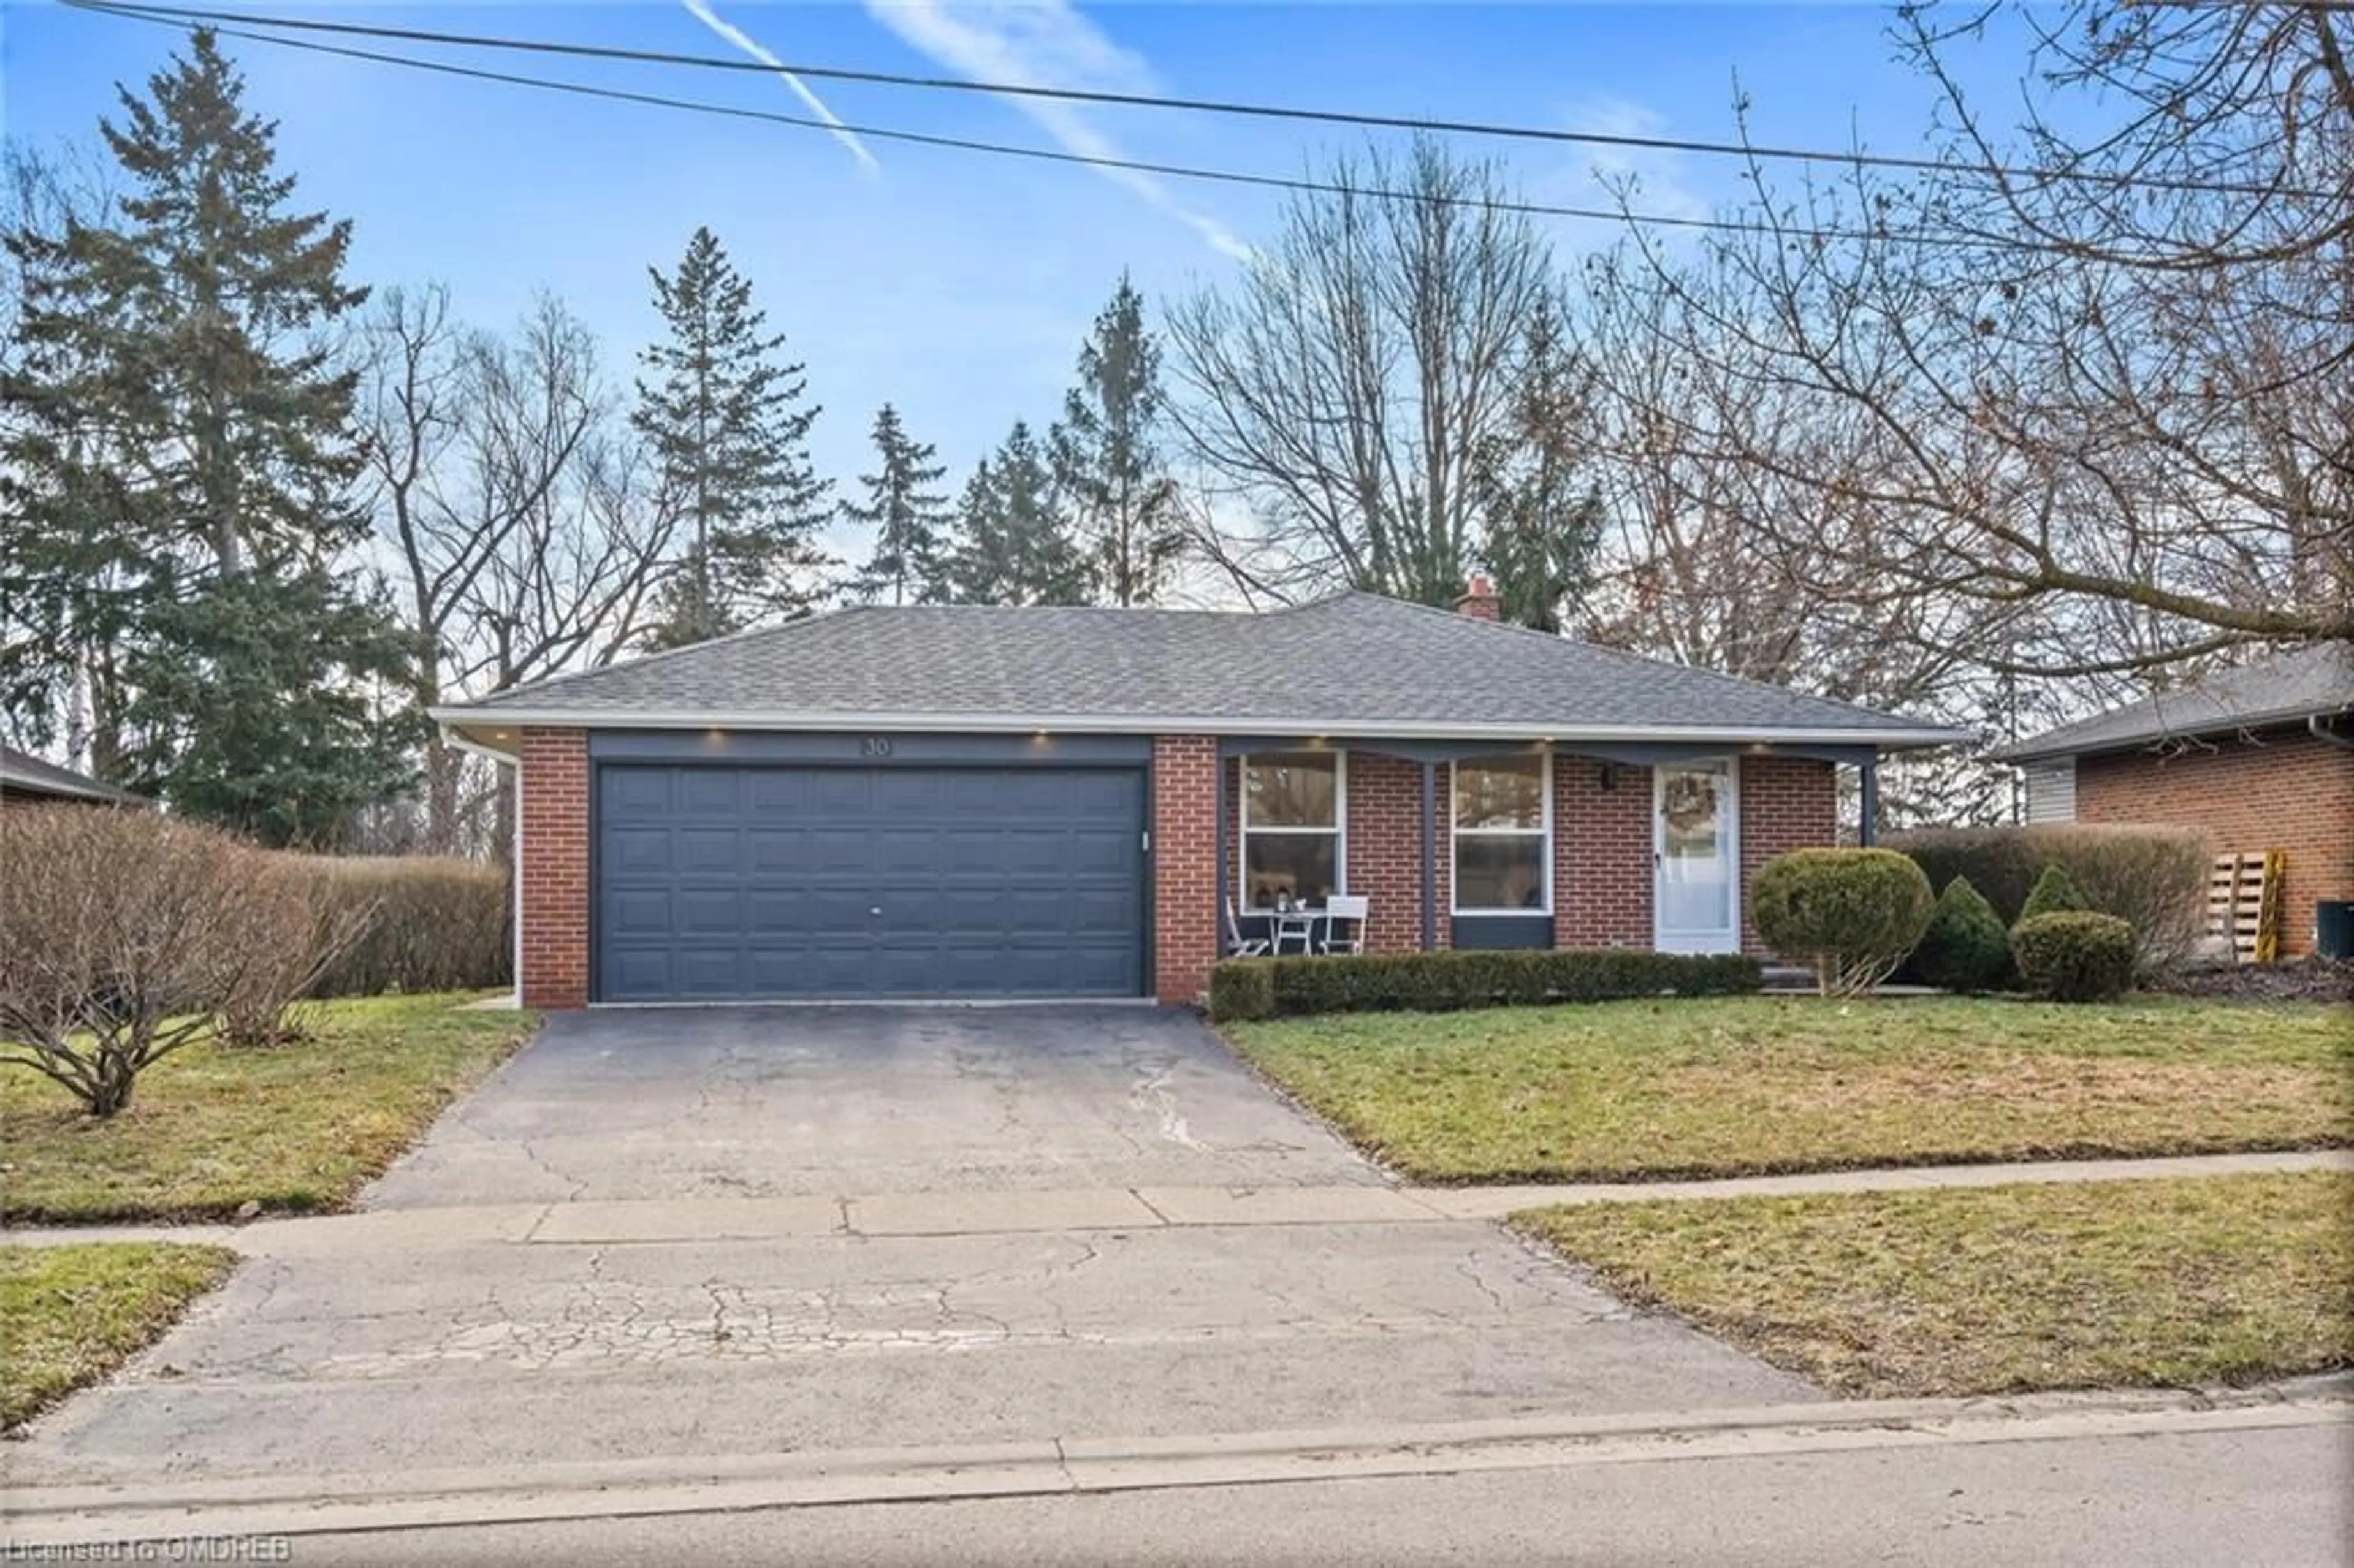 Home with brick exterior material for 30 Regan Cres, Georgetown Ontario L7G 1B1